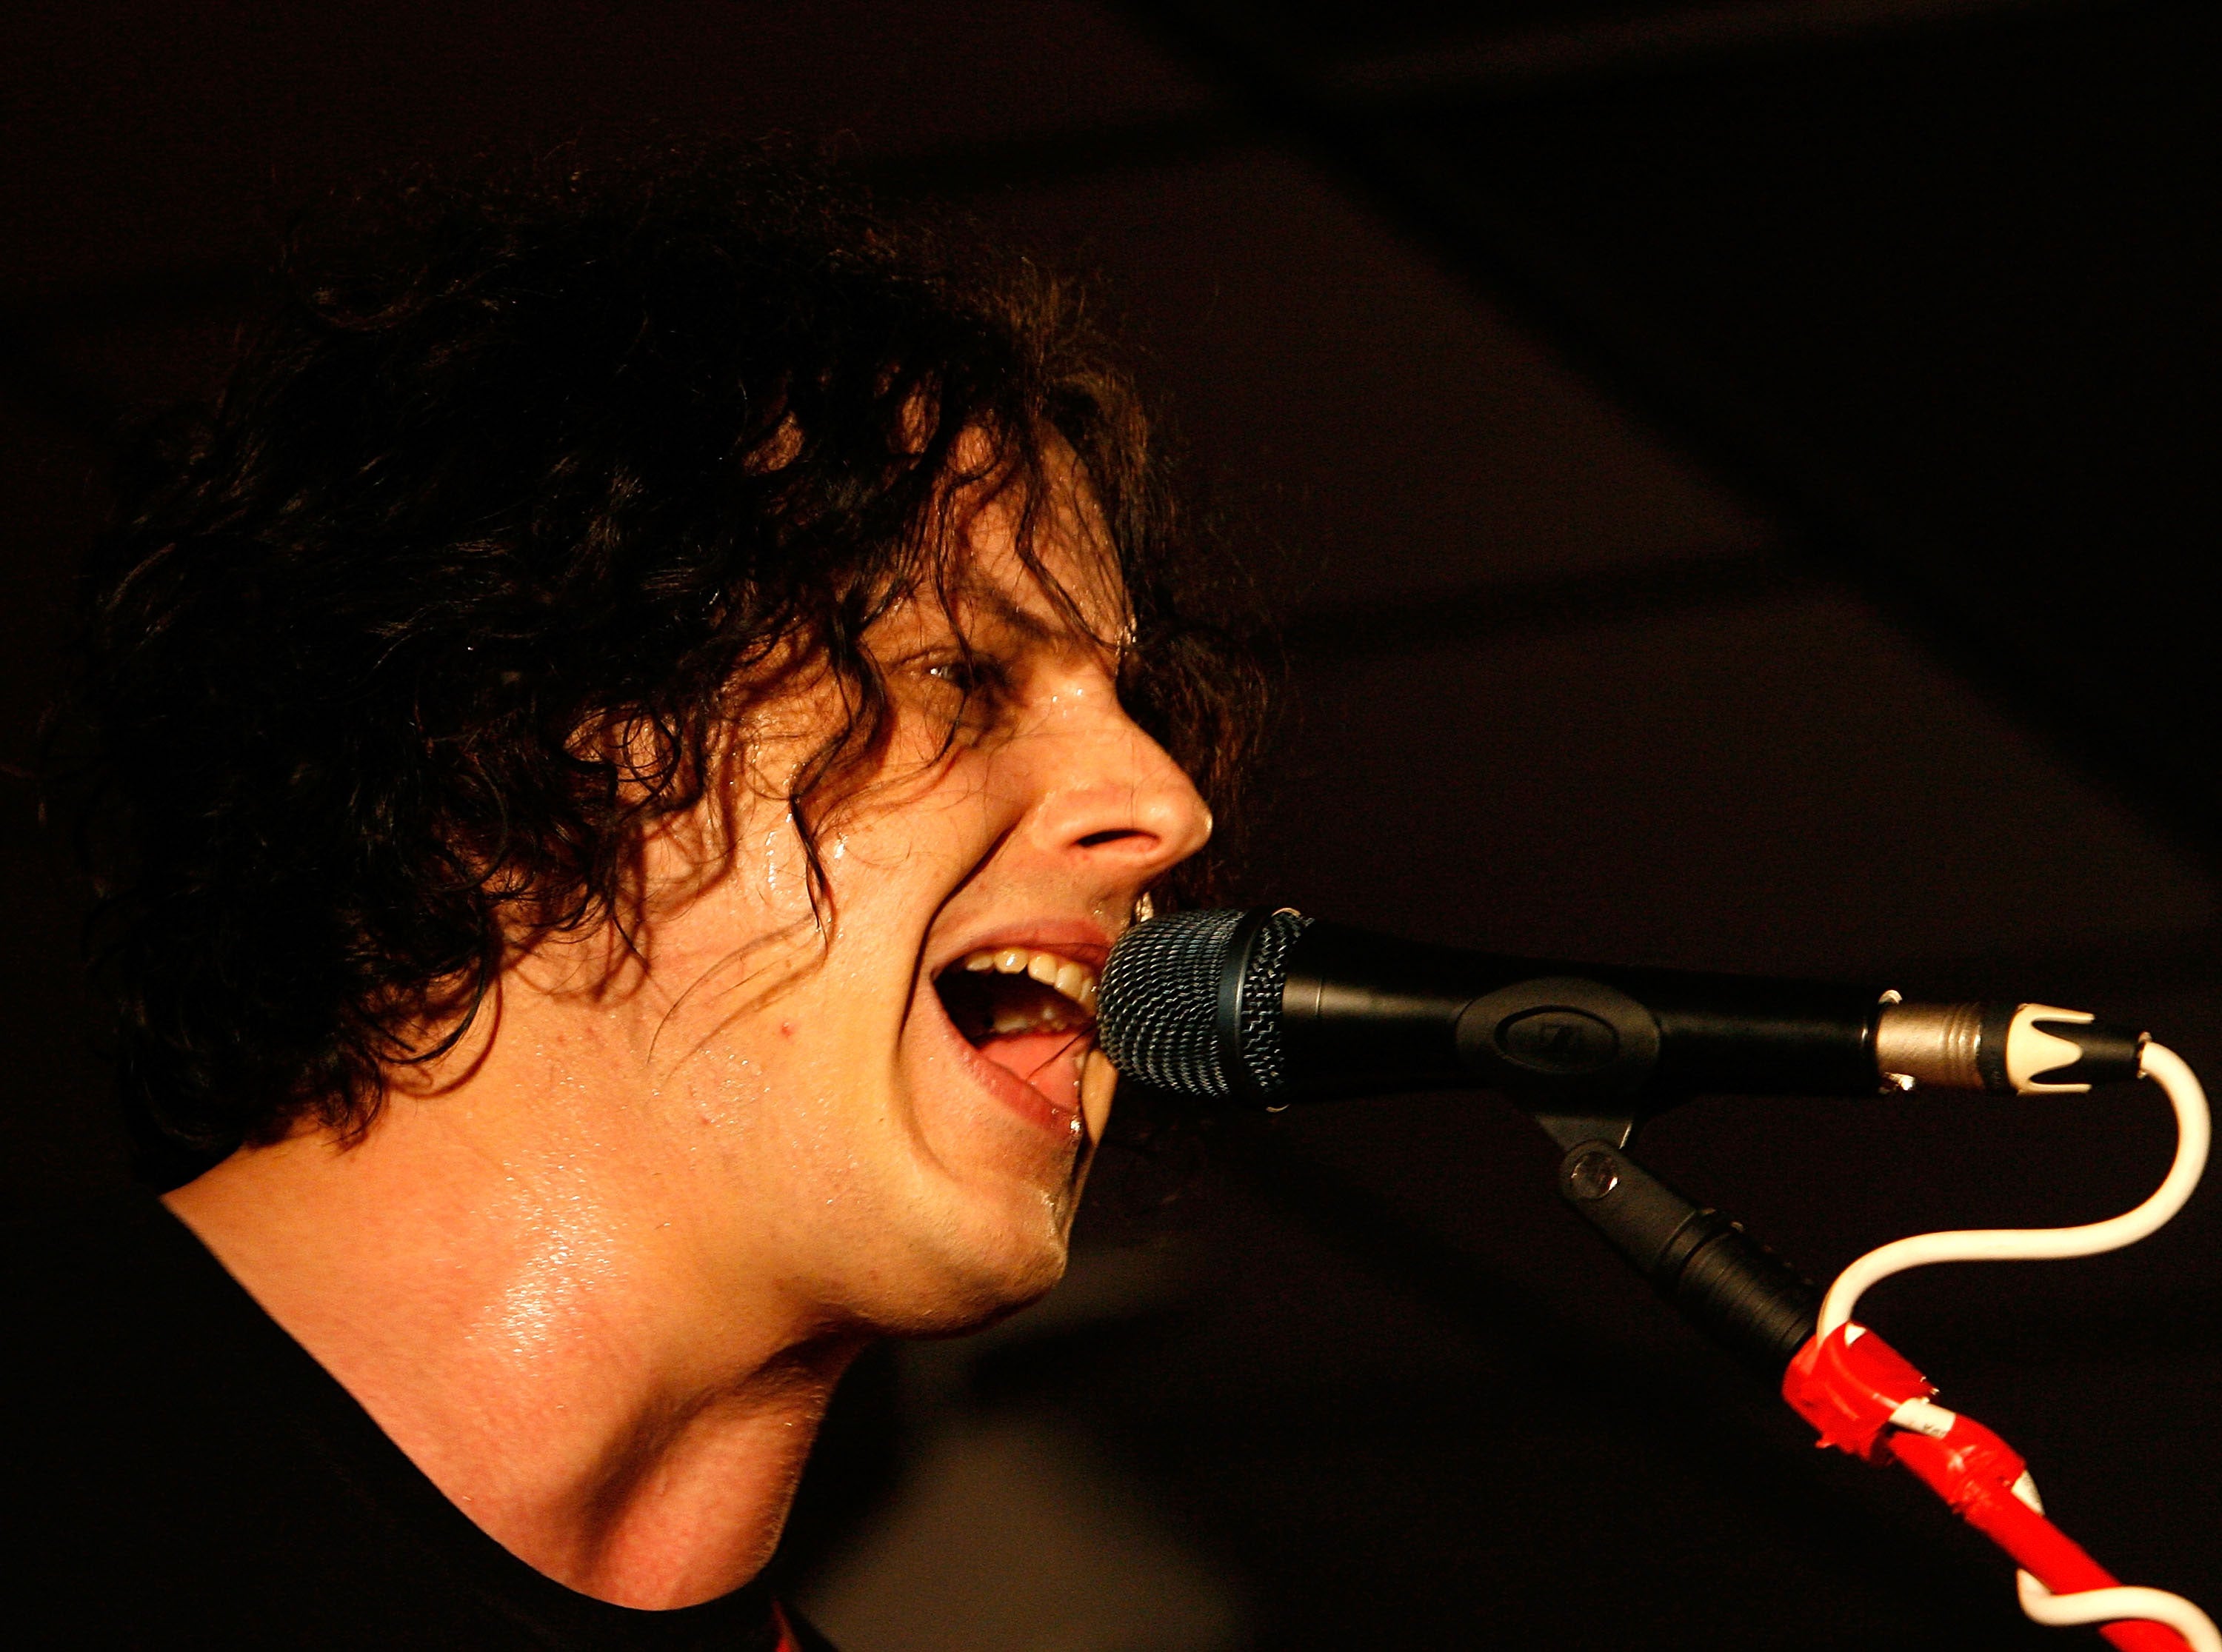 Jack White of The White Stripes performs at the 'Icky Thump Record Store' on 20 June, 2007, in Los Angeles, California